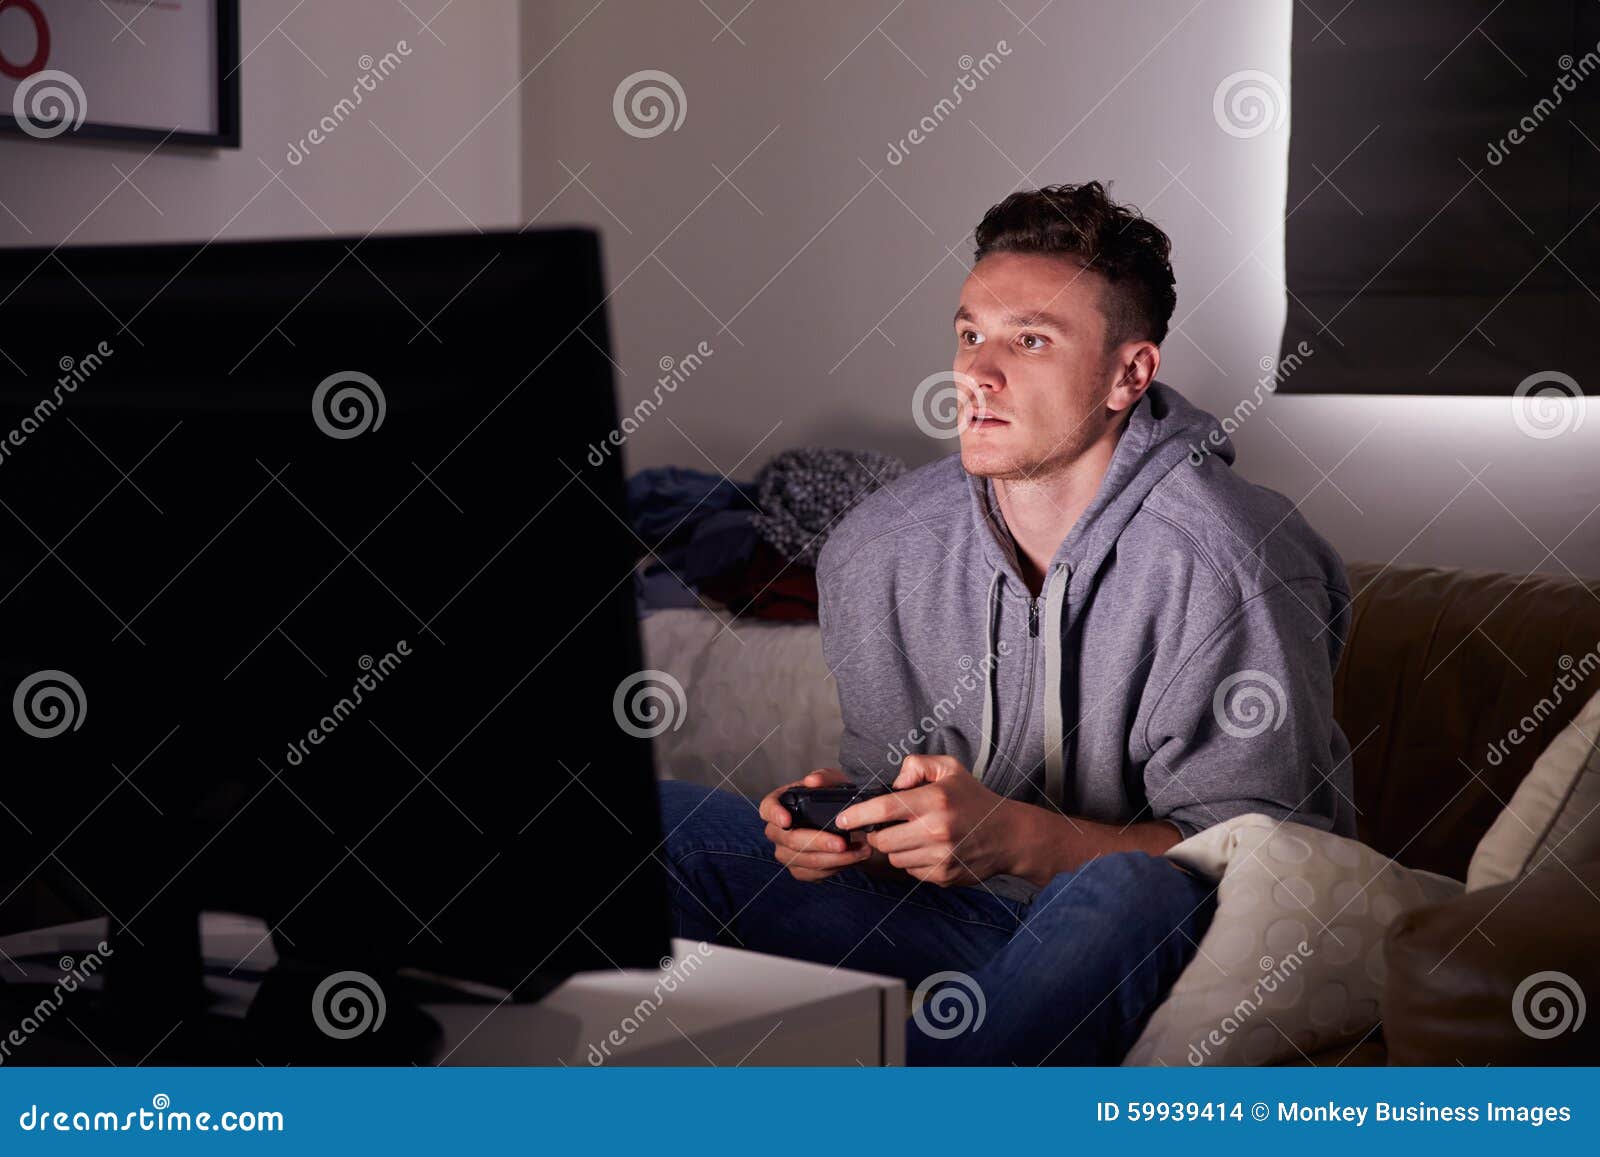 young man addicted to video gaming at home